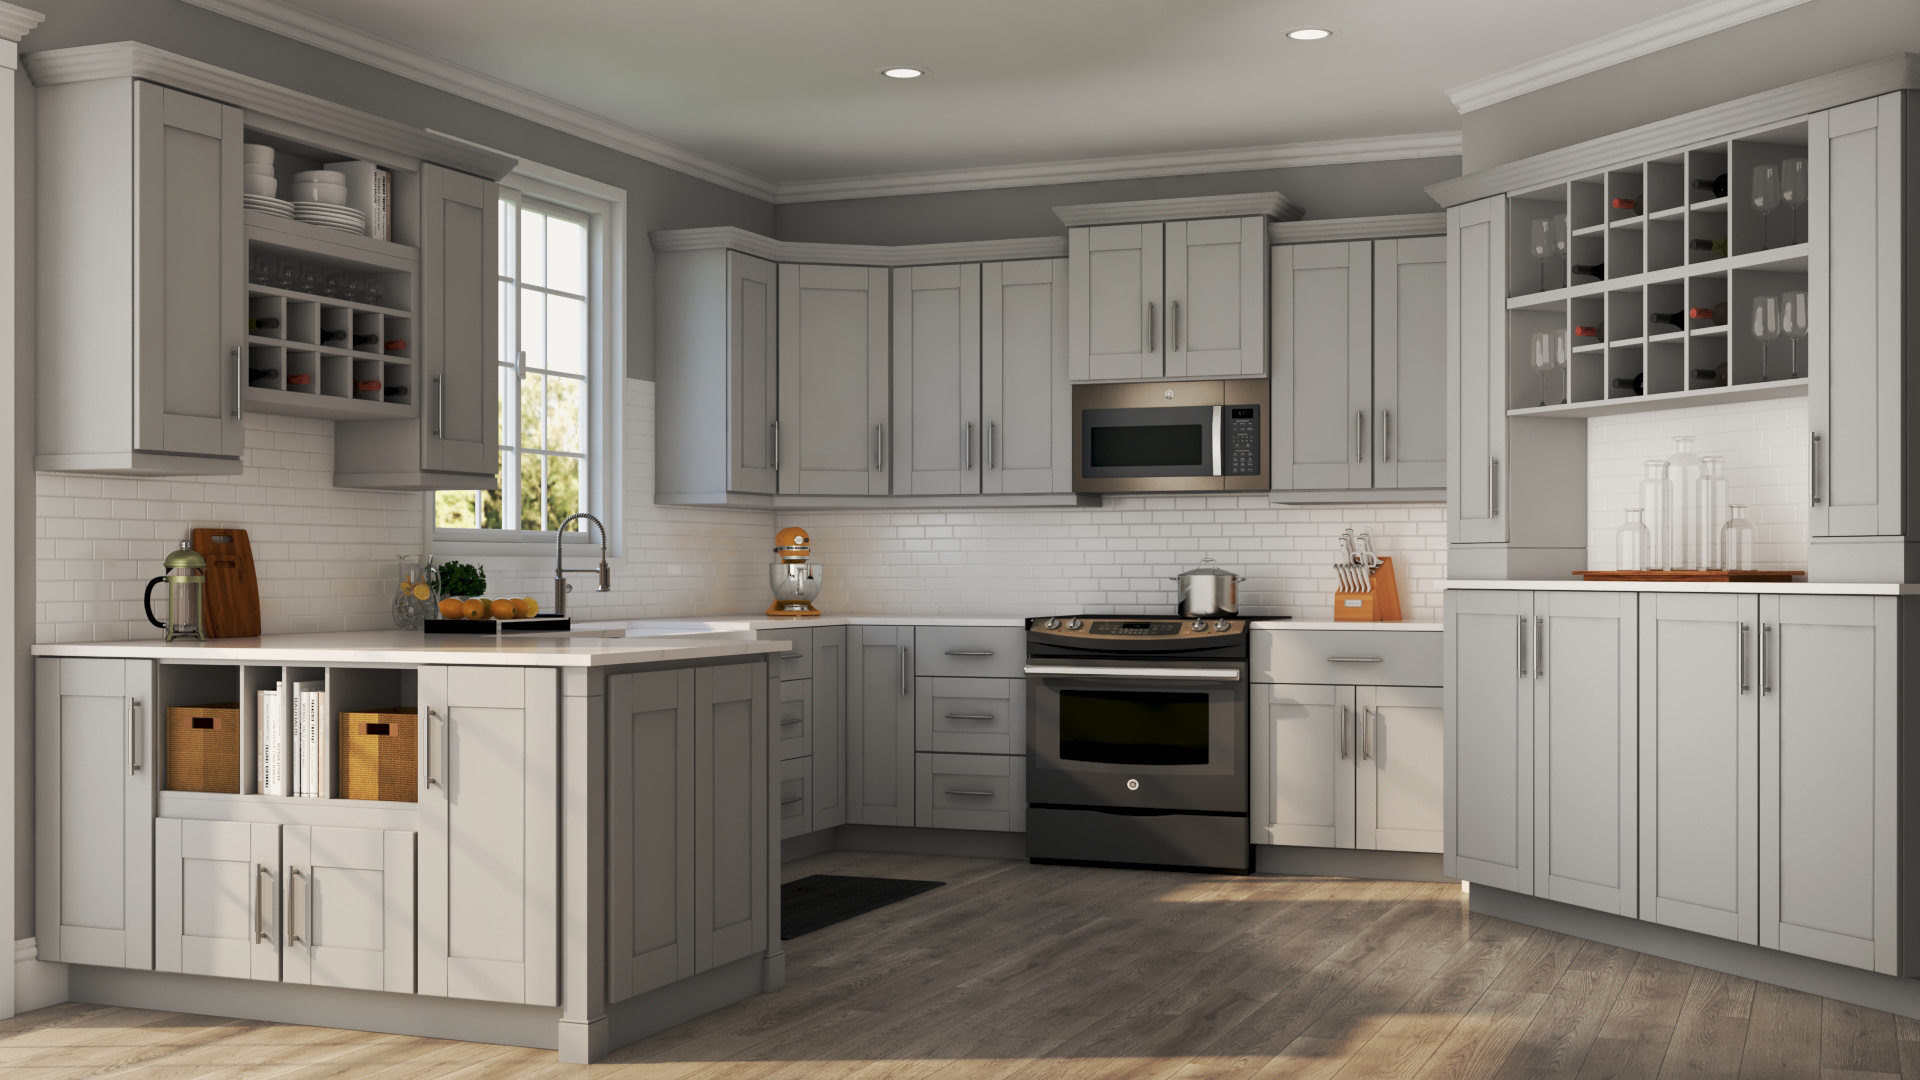 Shaker Base Cabinets in Dove Gray – Kitchen – The Home Depot